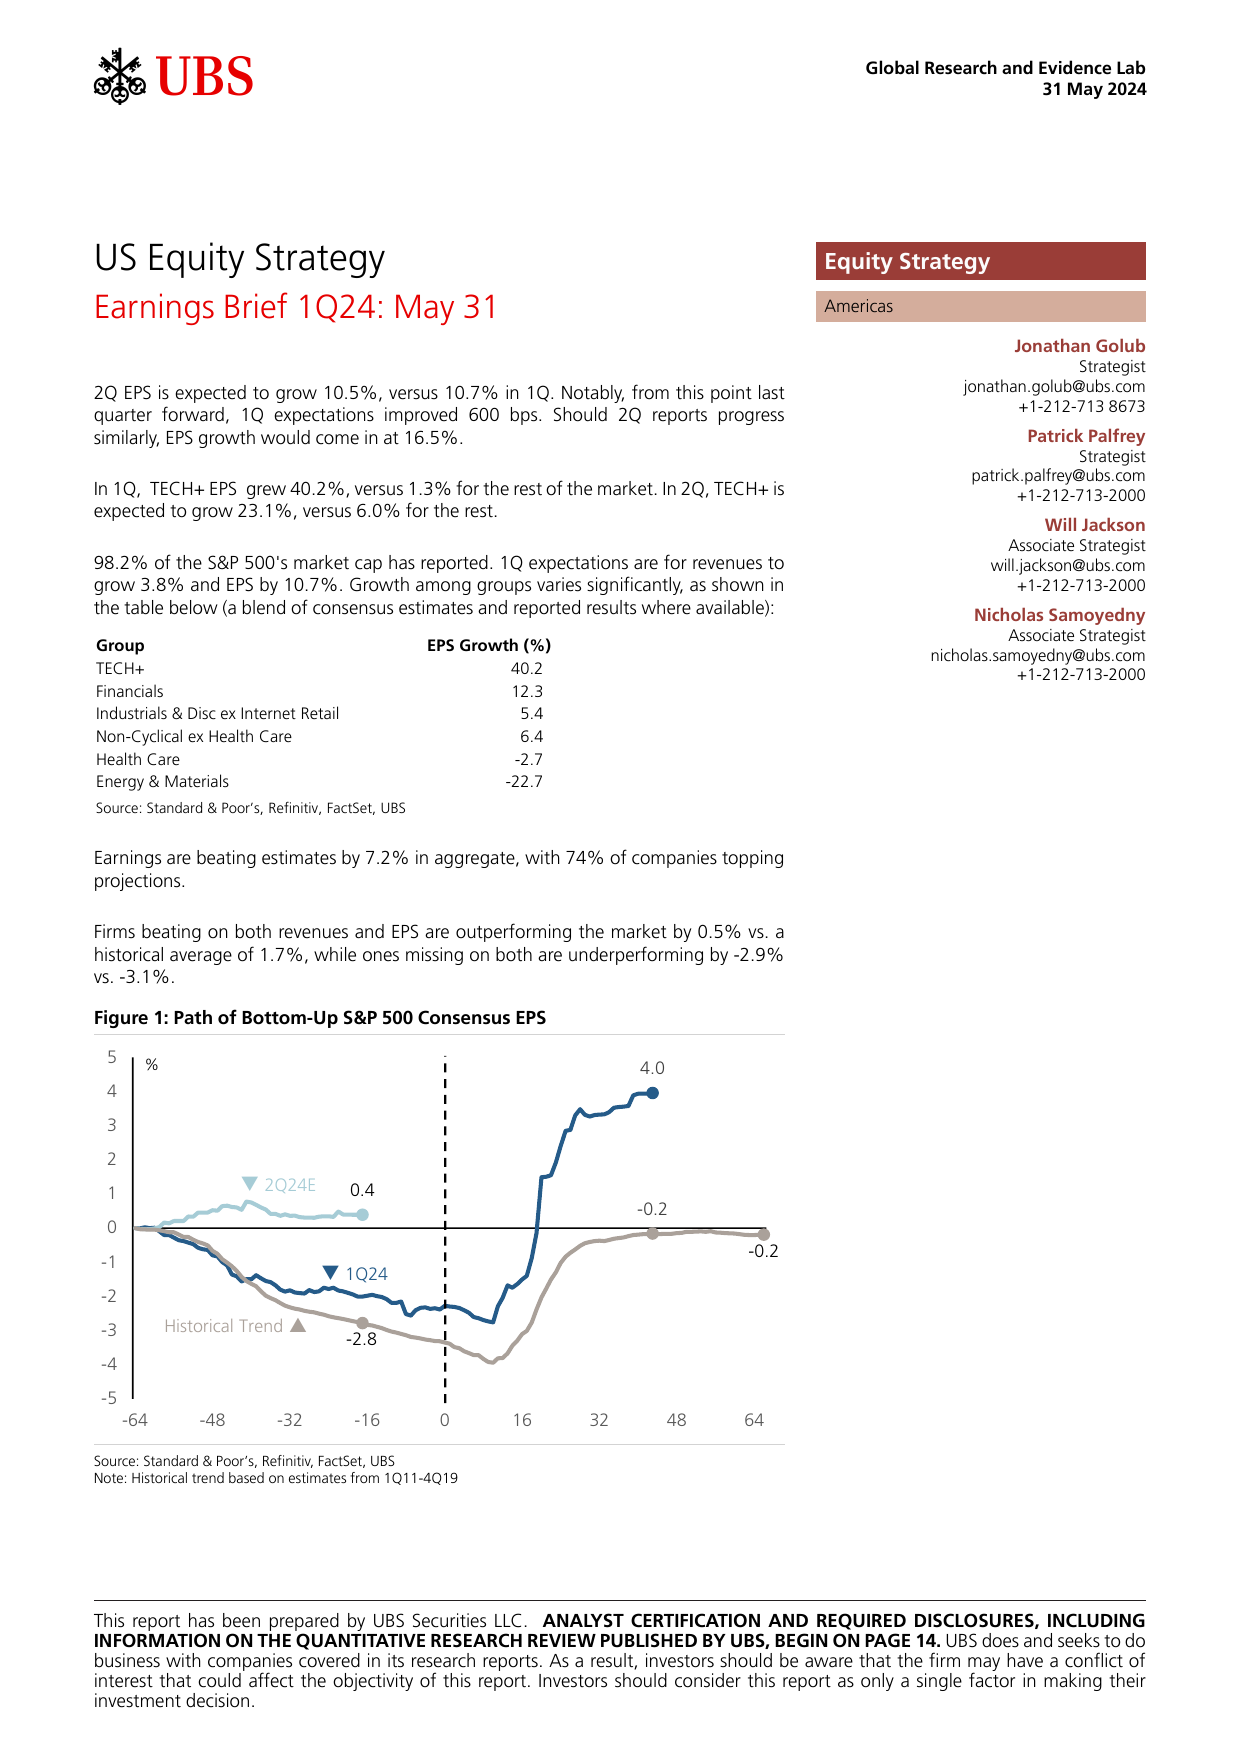 UBS Equities-US Equity Strategy _Earnings Brief 1Q24 May 31_ Golub-108467990.pdf